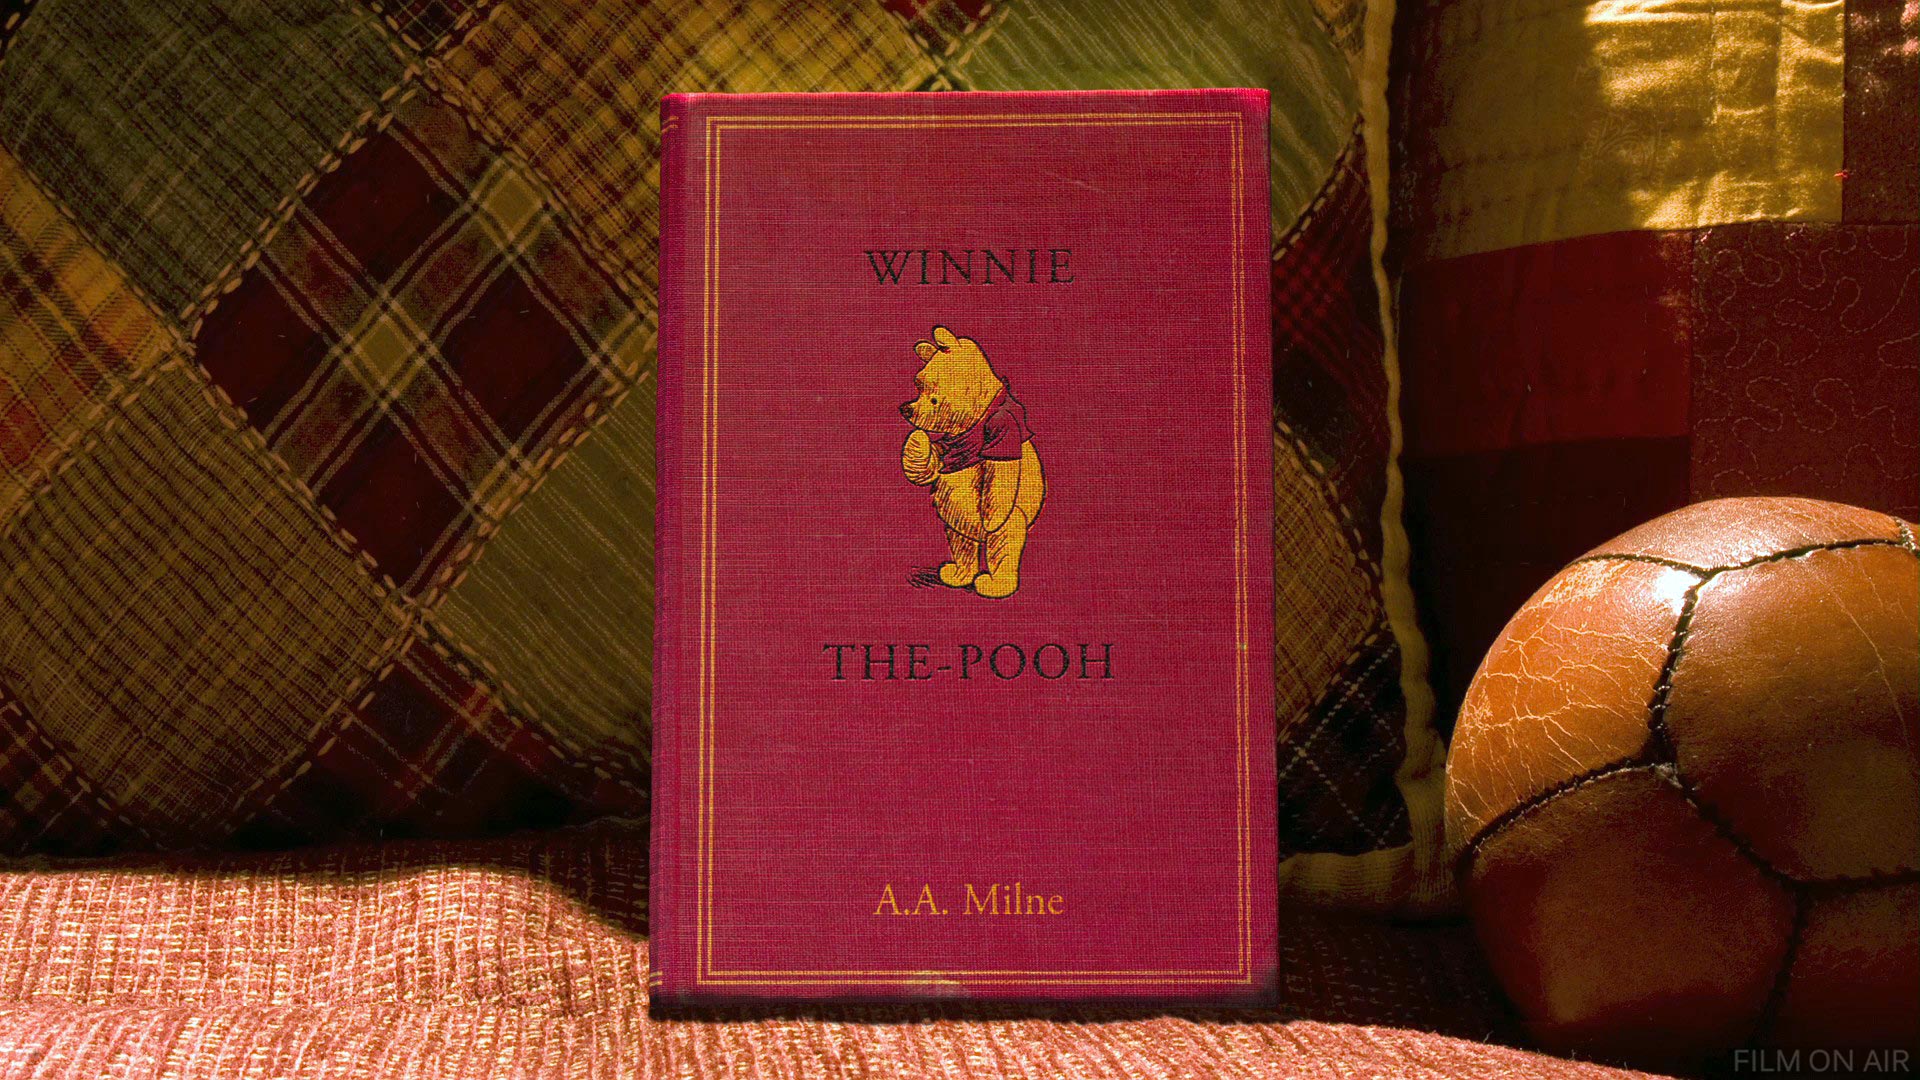 Book Winnie The Pooh
 in Winnie the Pooh in Winnie the Pooh